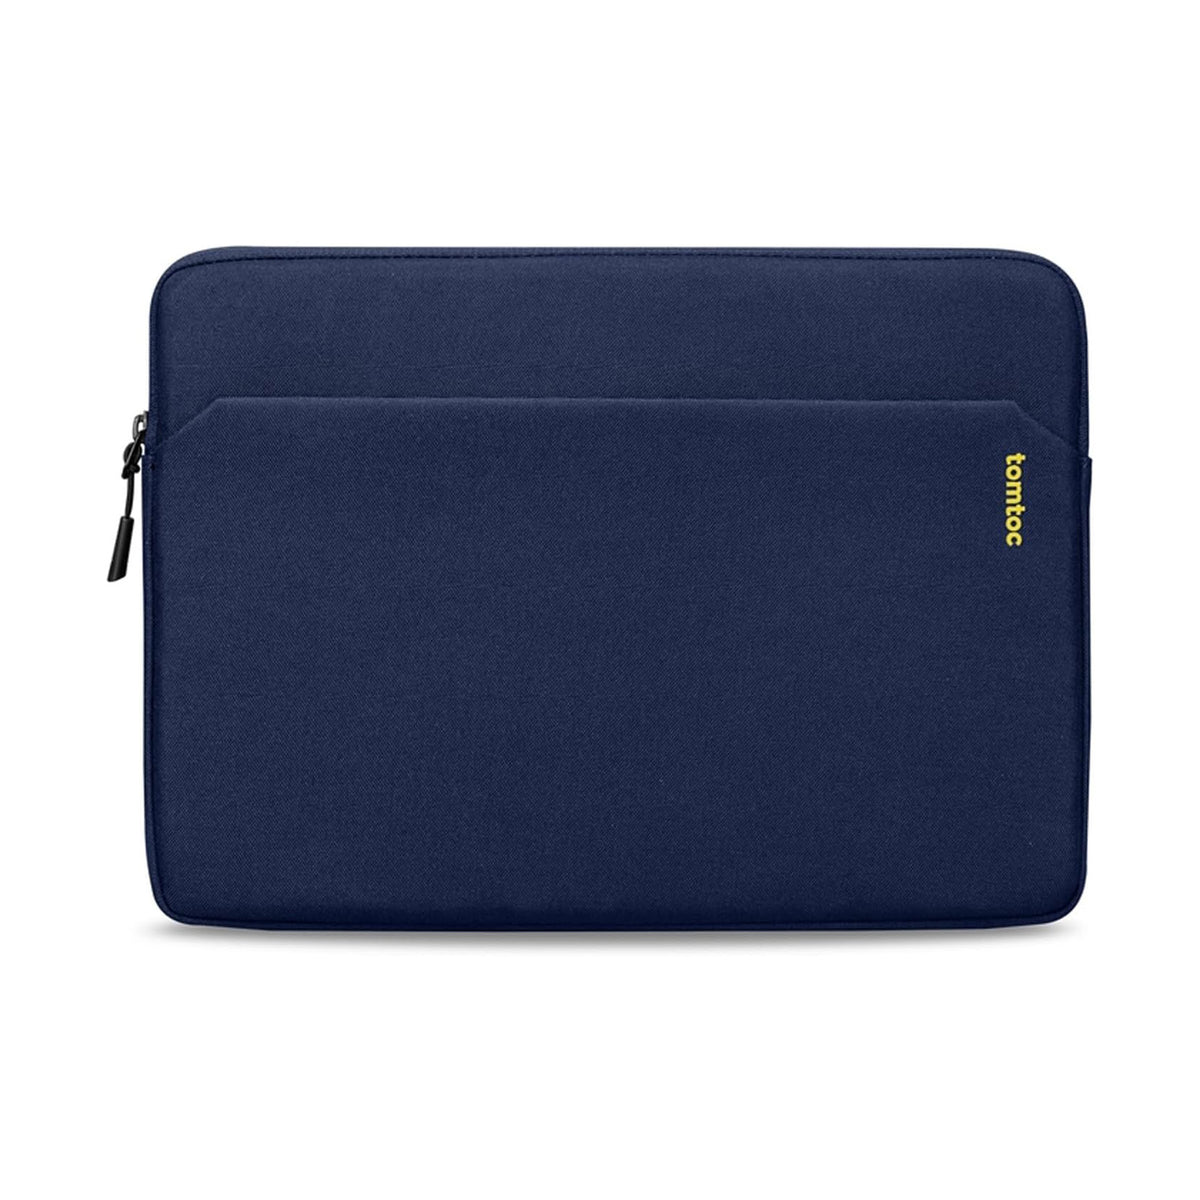 tomtoc 12.9 Inch Tablet Sleeve Bag - Pad Pro 12.9 with Magic Keyboard - Navy Blue